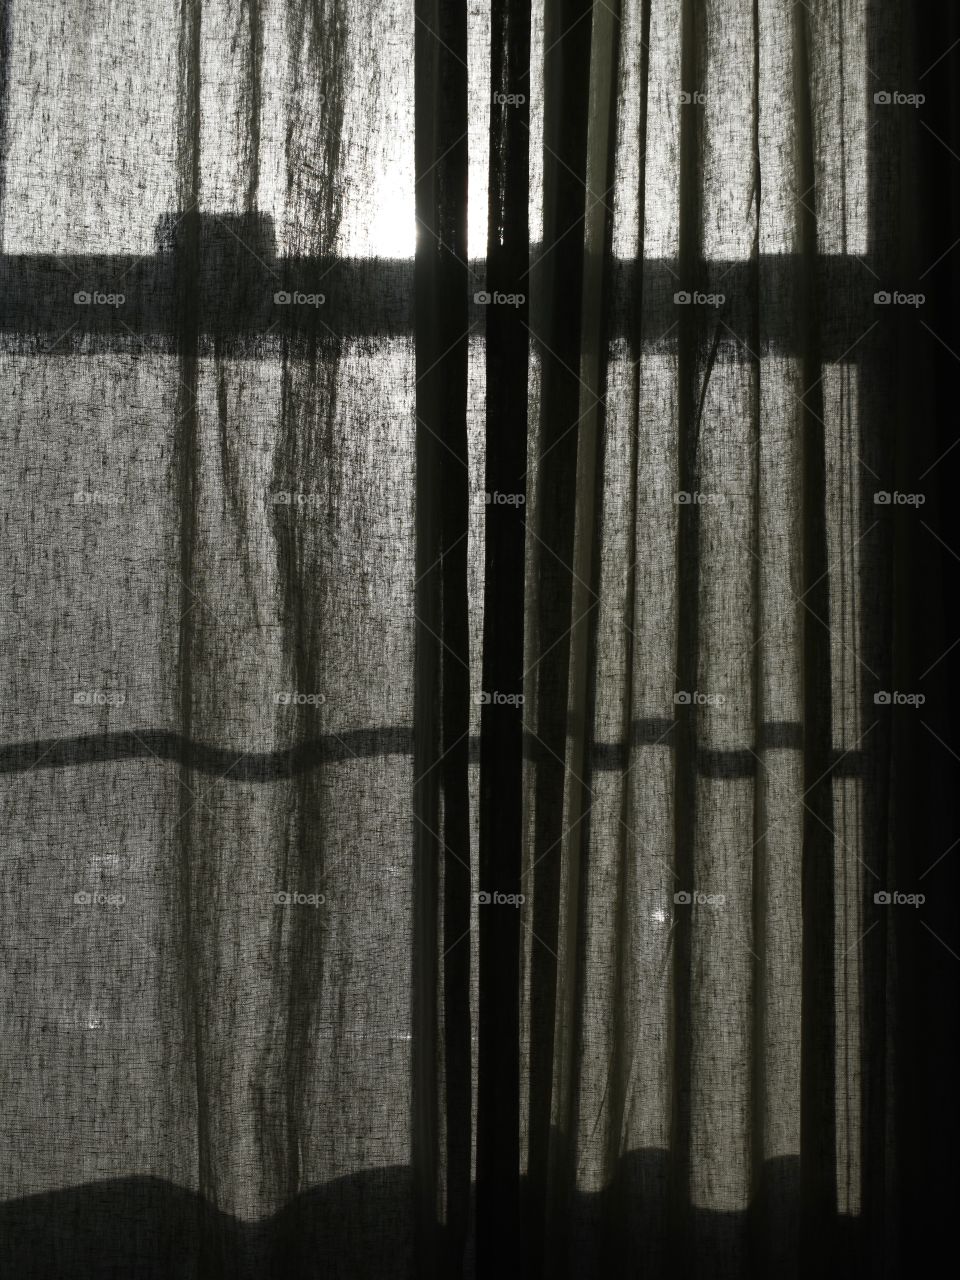 Curtains abstract design texture 